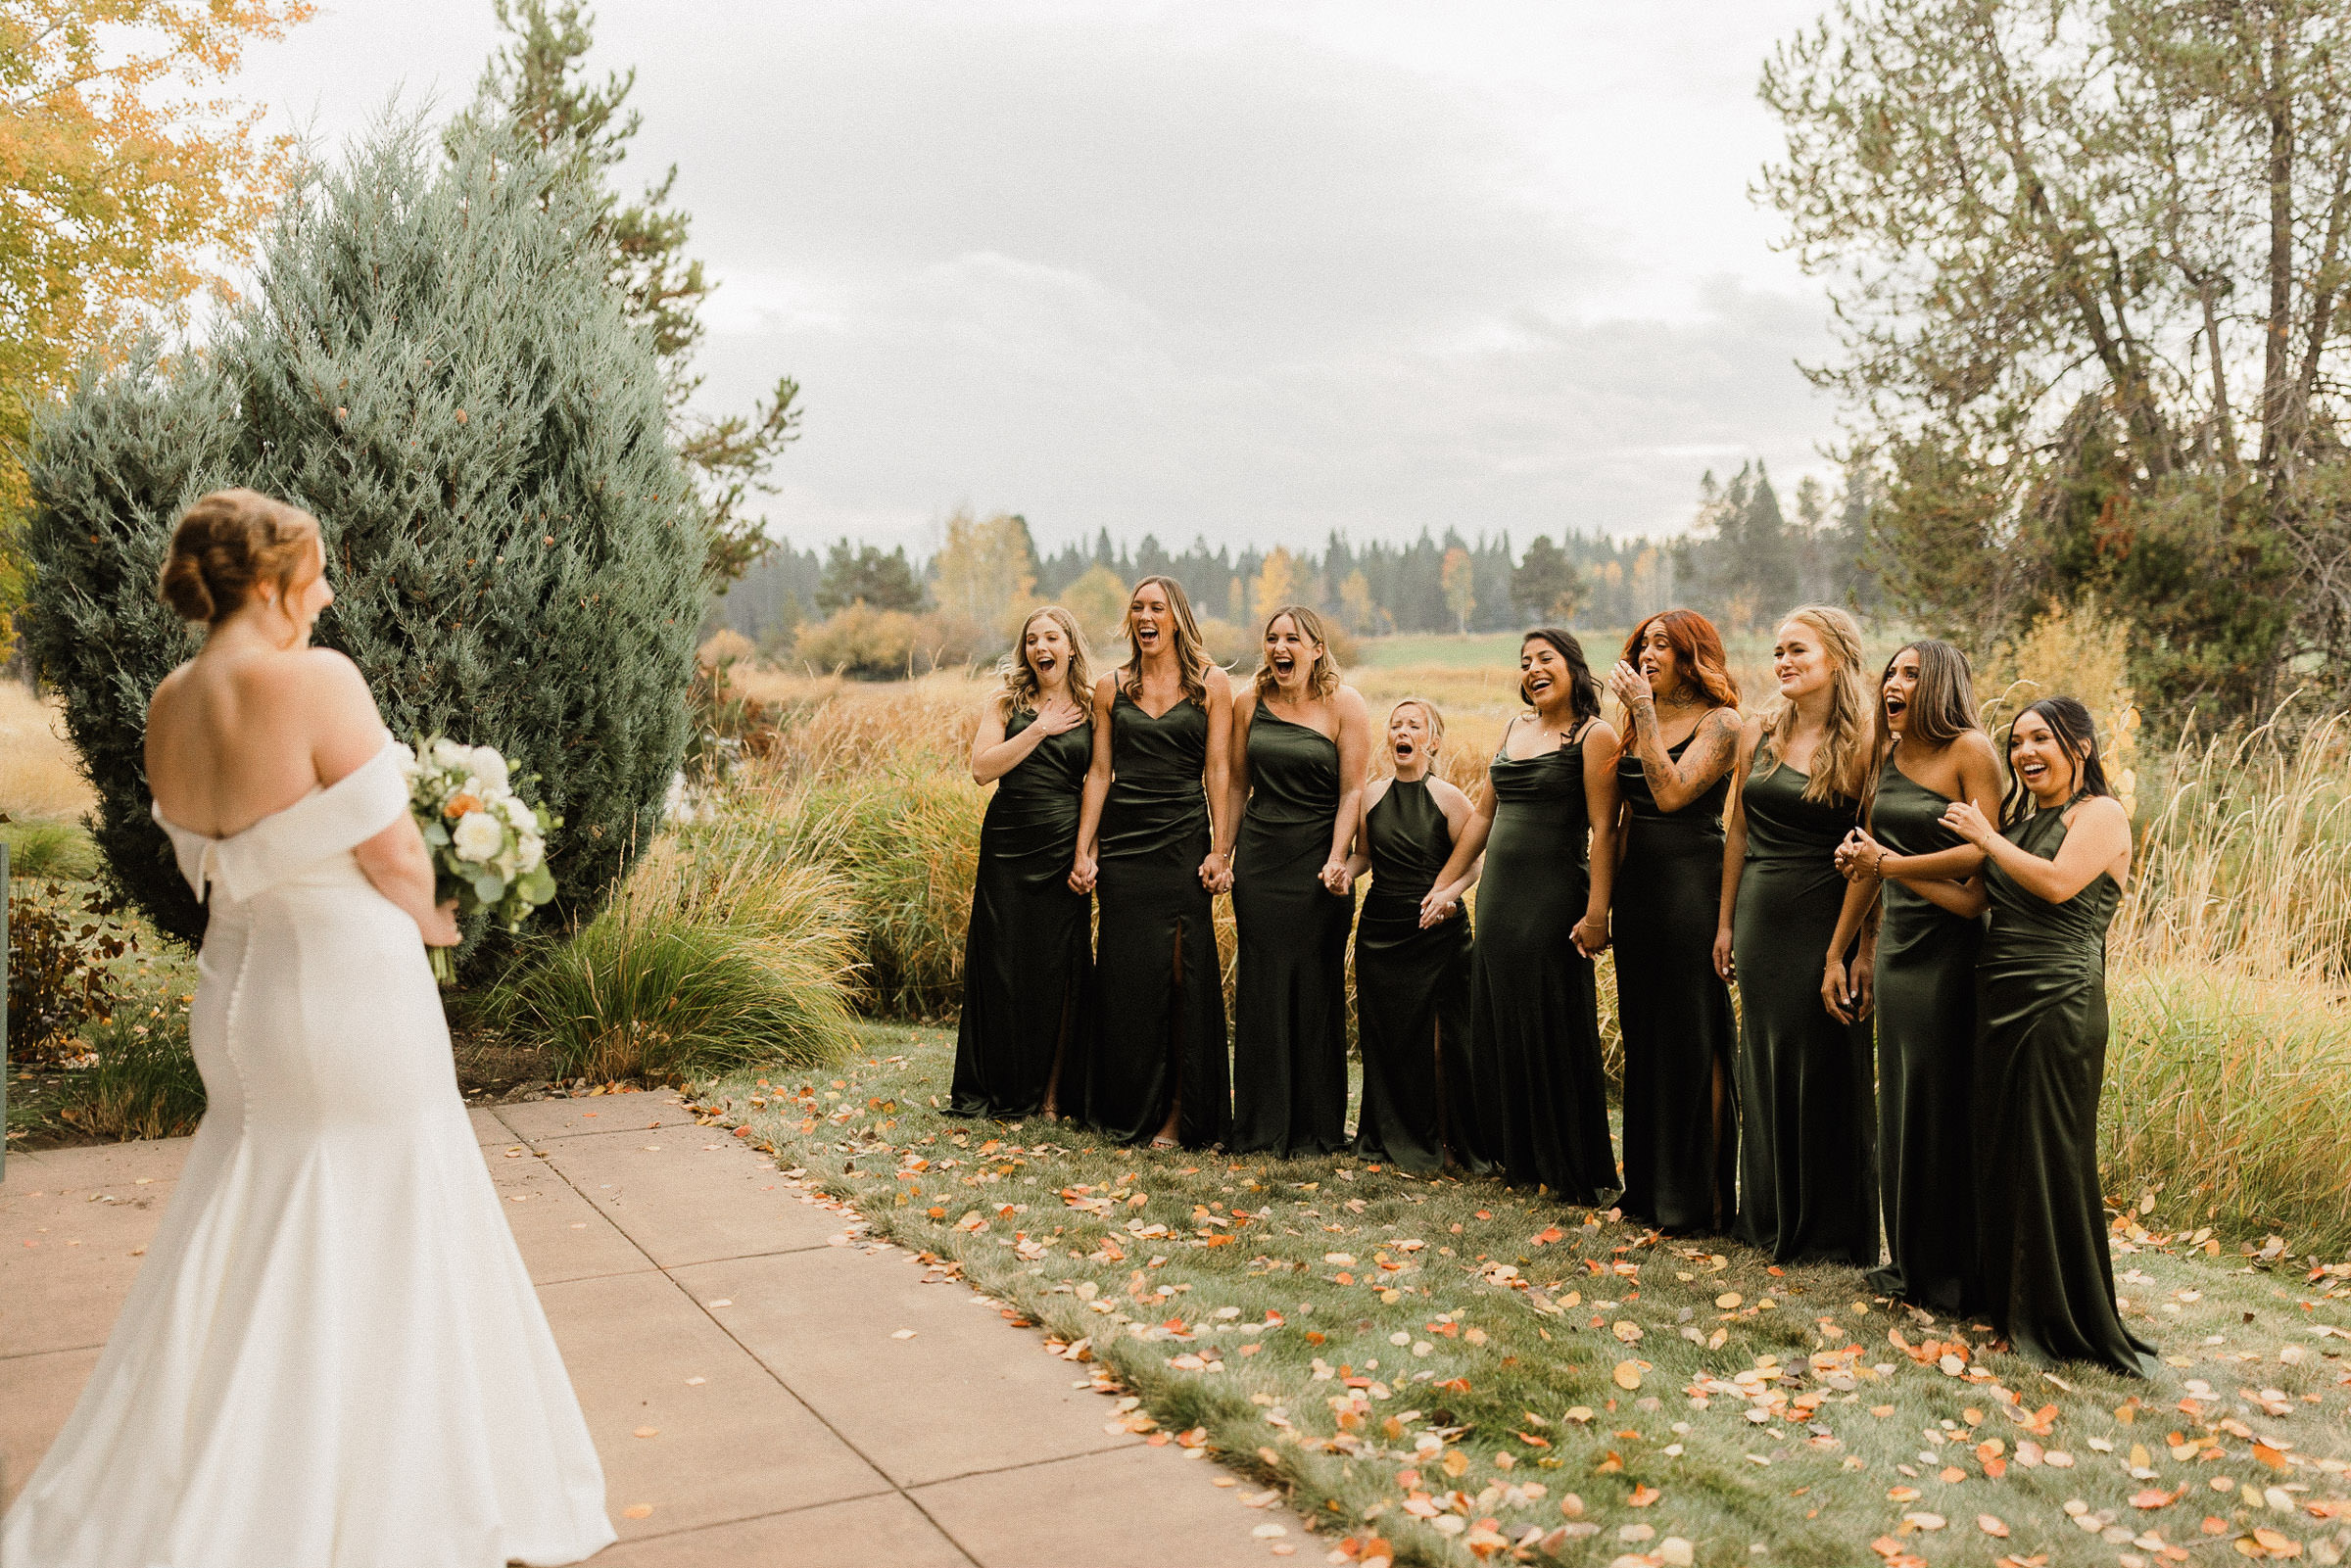 Bridesmaids react enthusiastically as they see bride in her dress for the first time